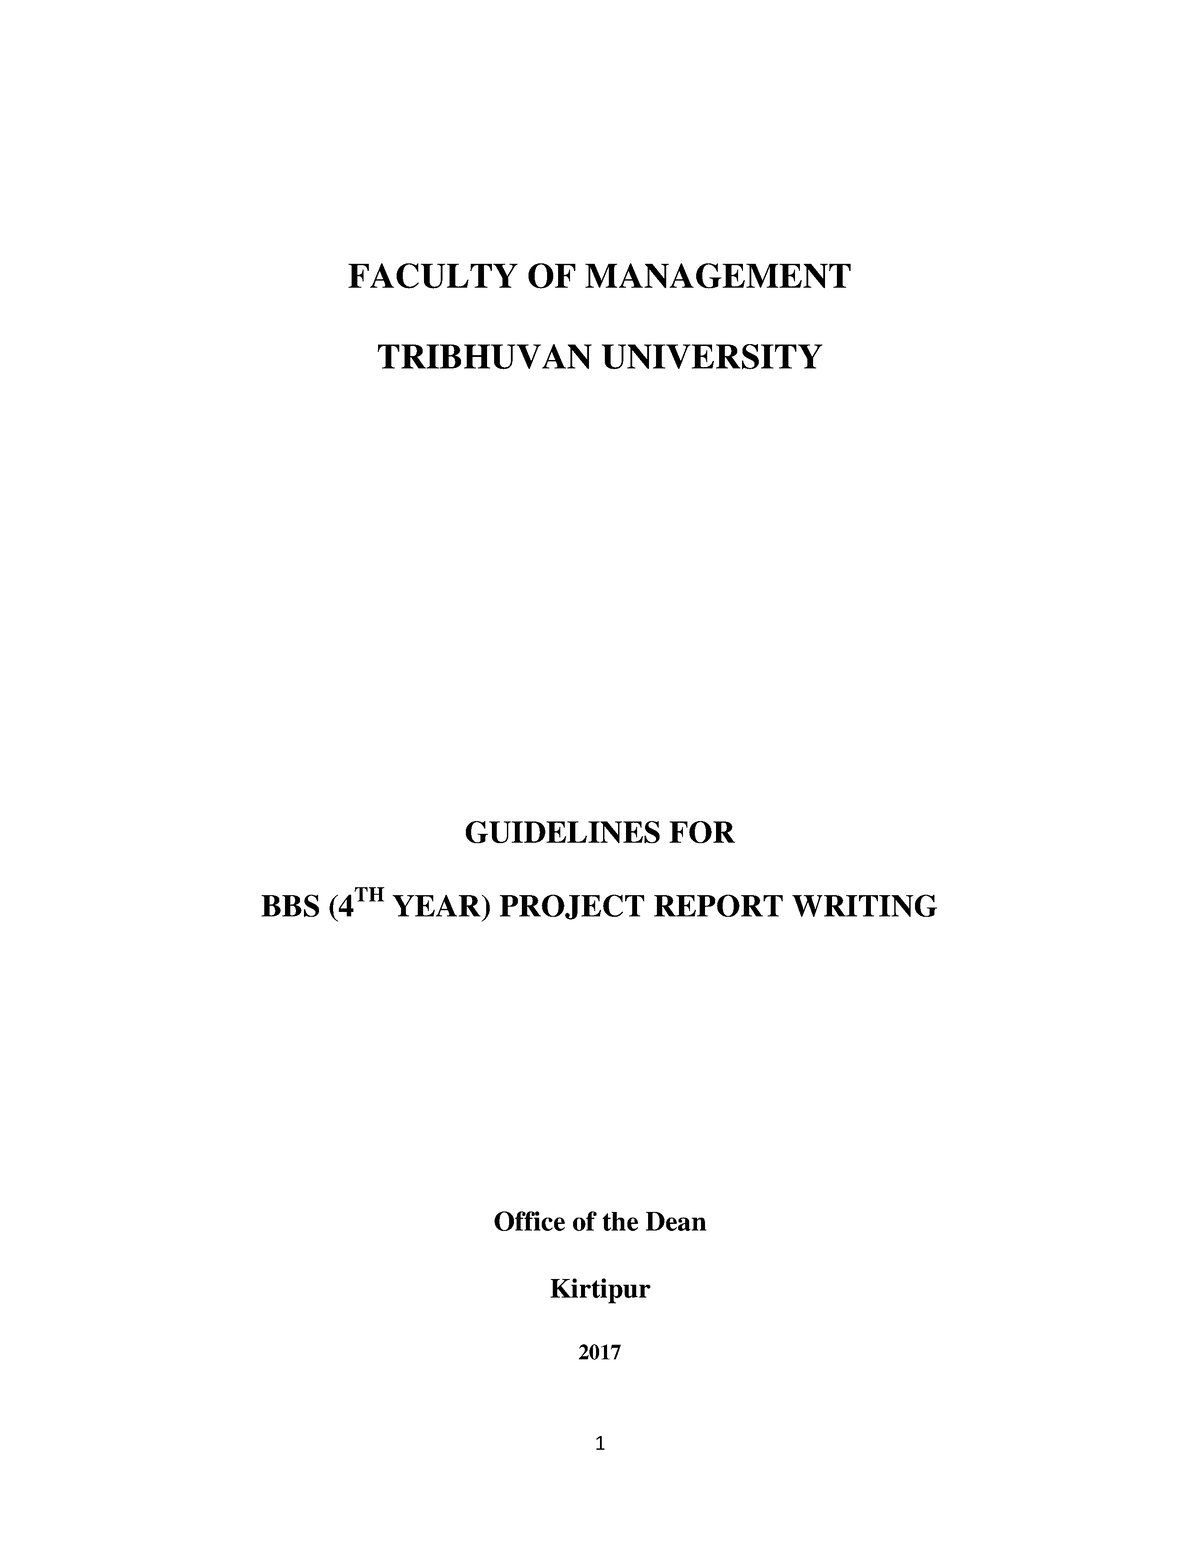 bbs 4th year thesis proposal